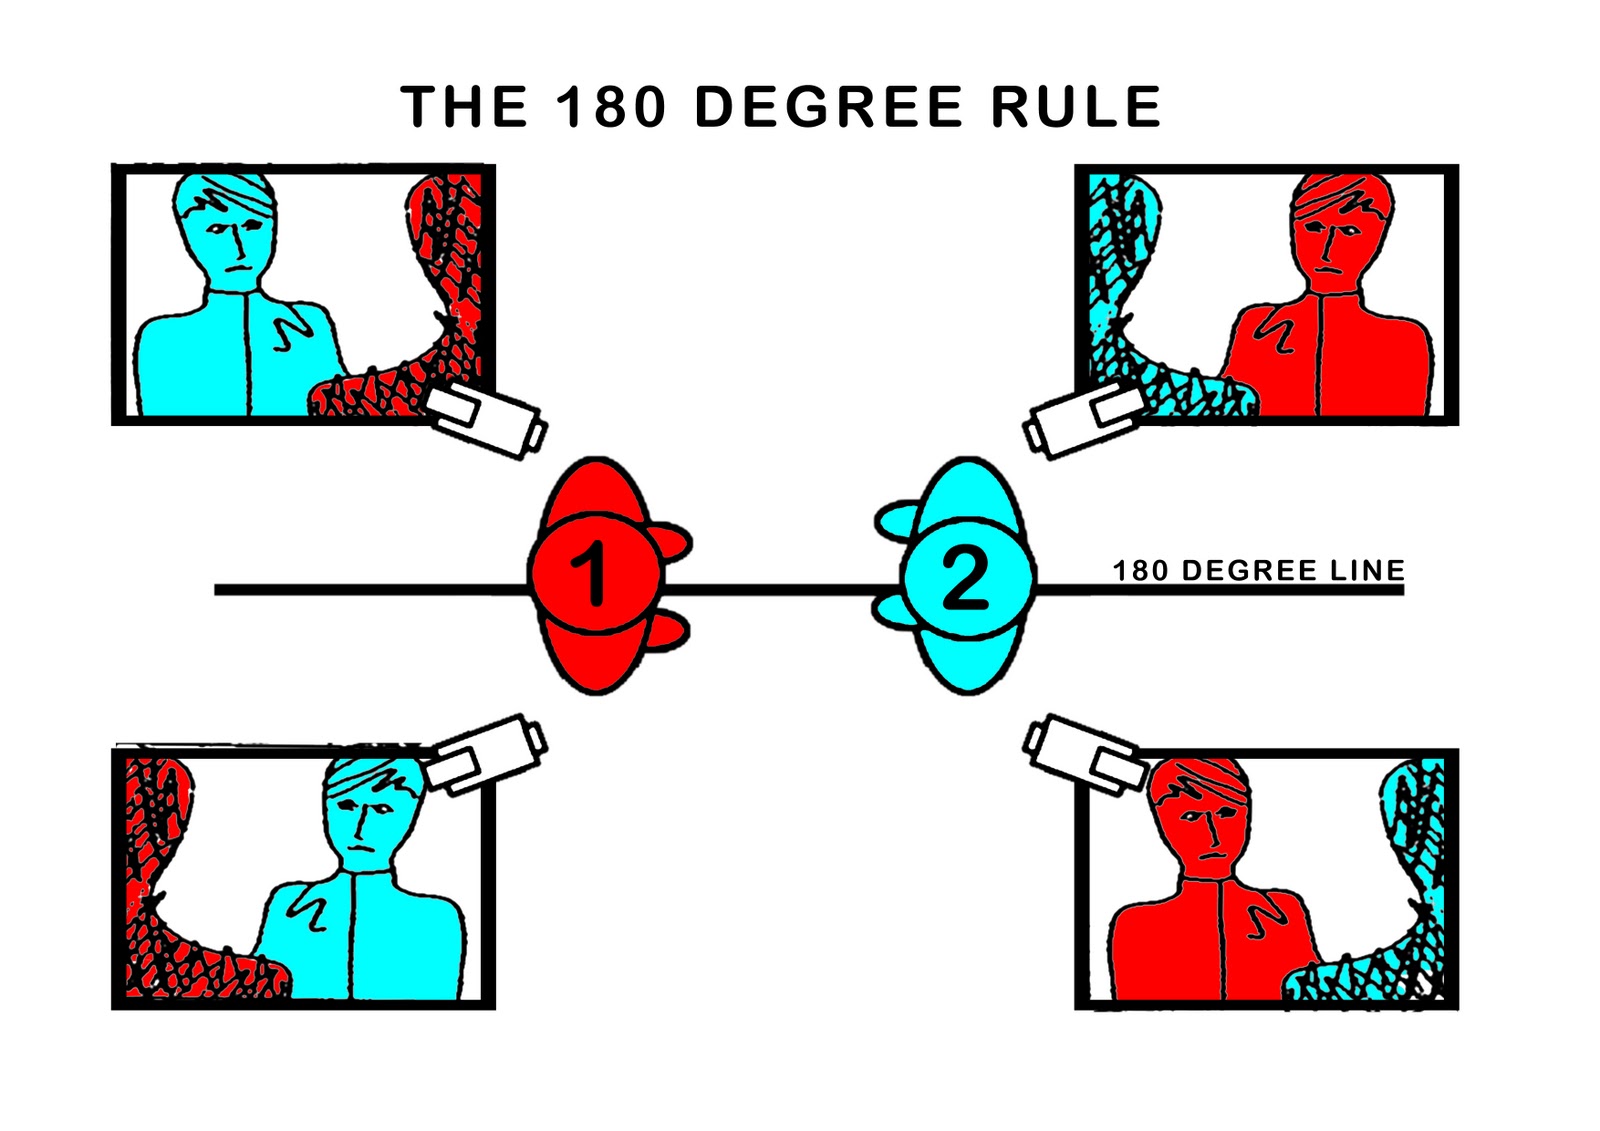 SAT Level 3 YEAR 1: SESSION 12: FILMING DIALOGUE & THE 180 DEGREE RULE